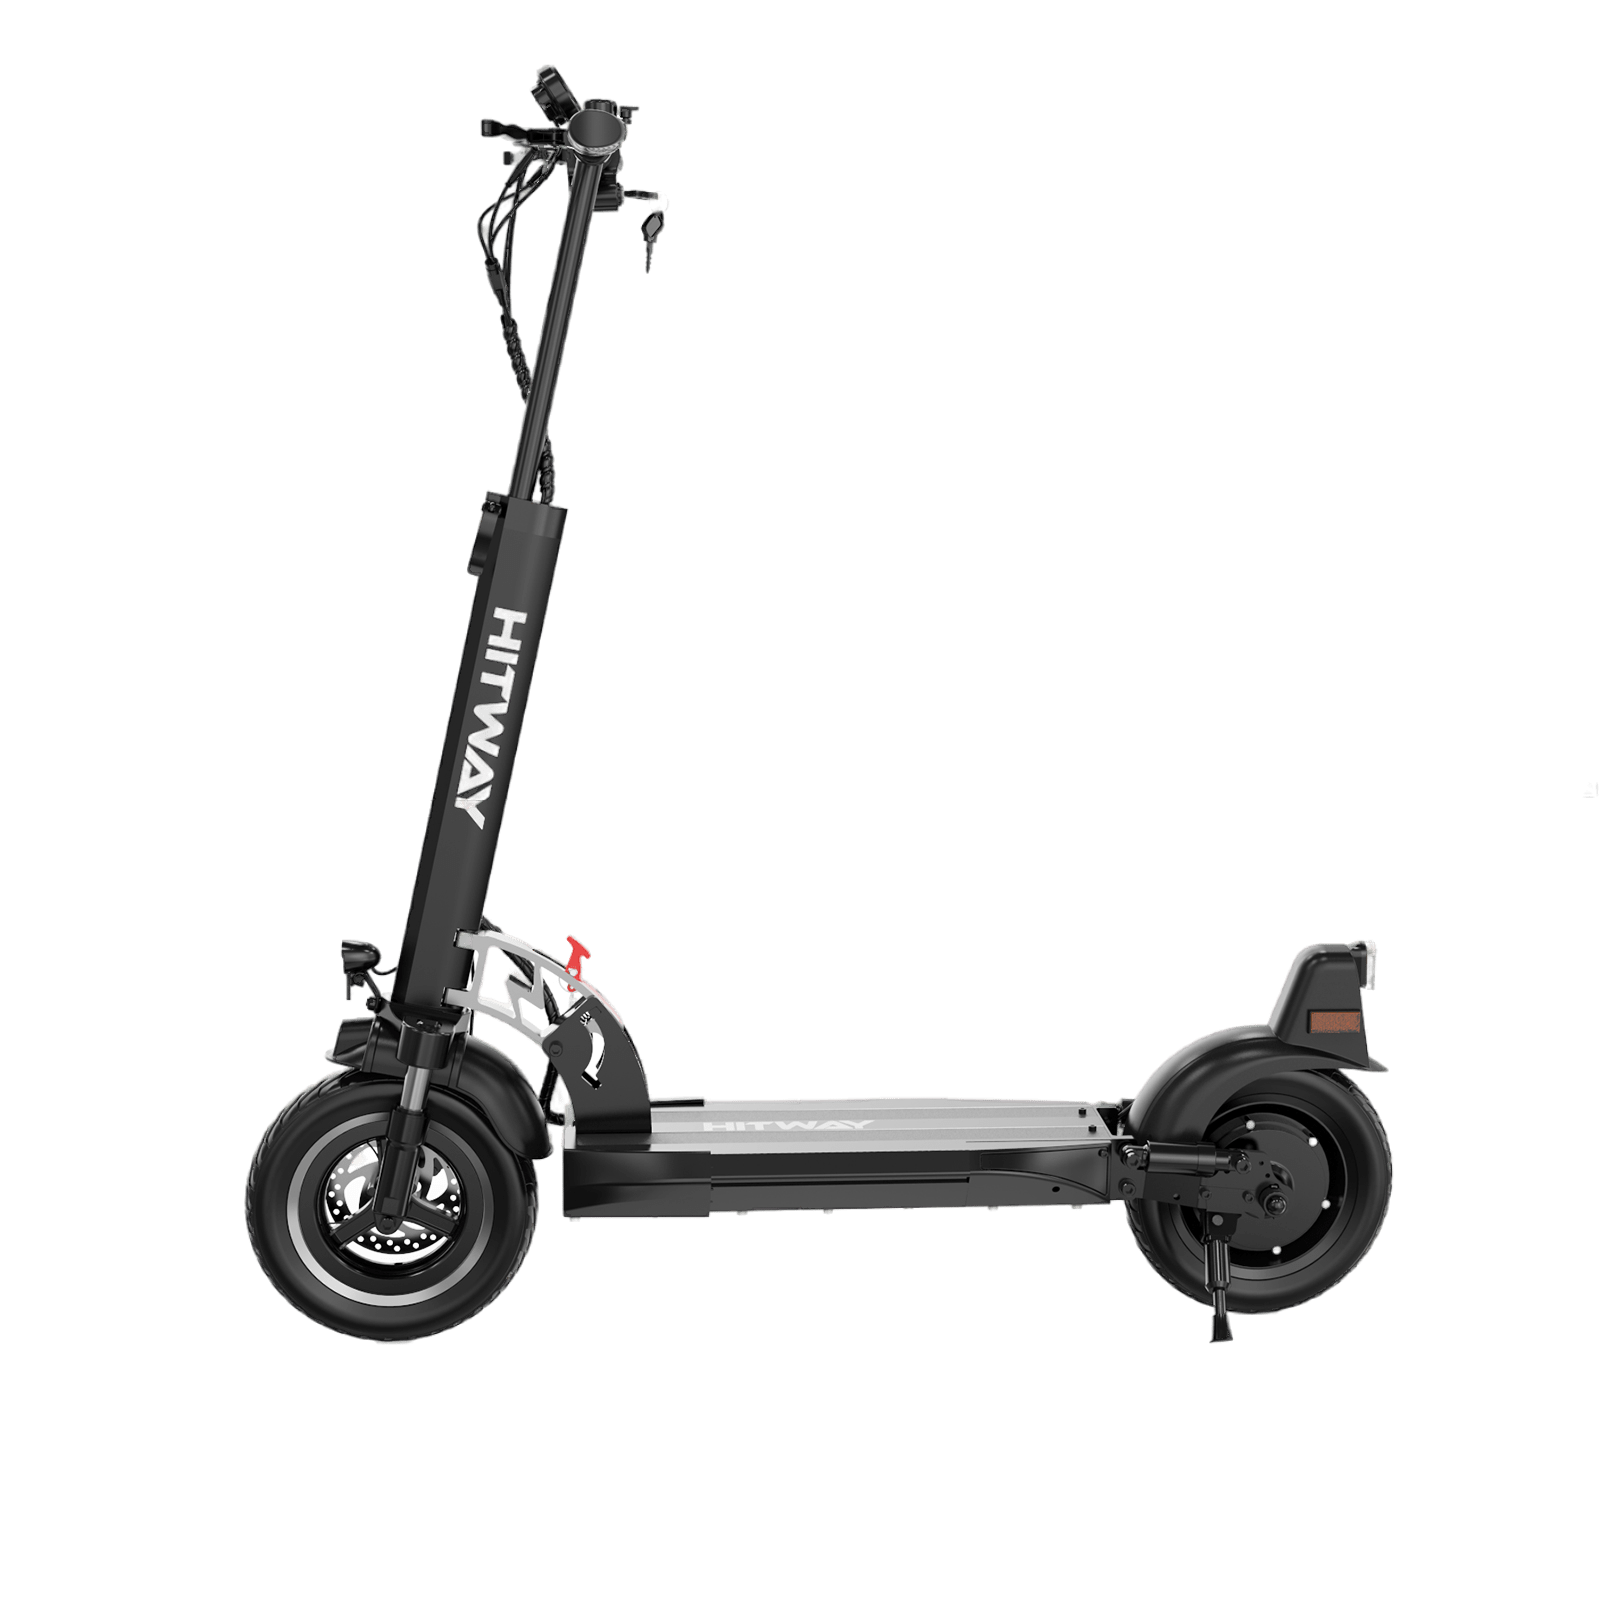 HITWAY H5 Electric Scooter E schwarz) Scooter (10 mit ABE Zoll, E-Scooter Straßenzulassung